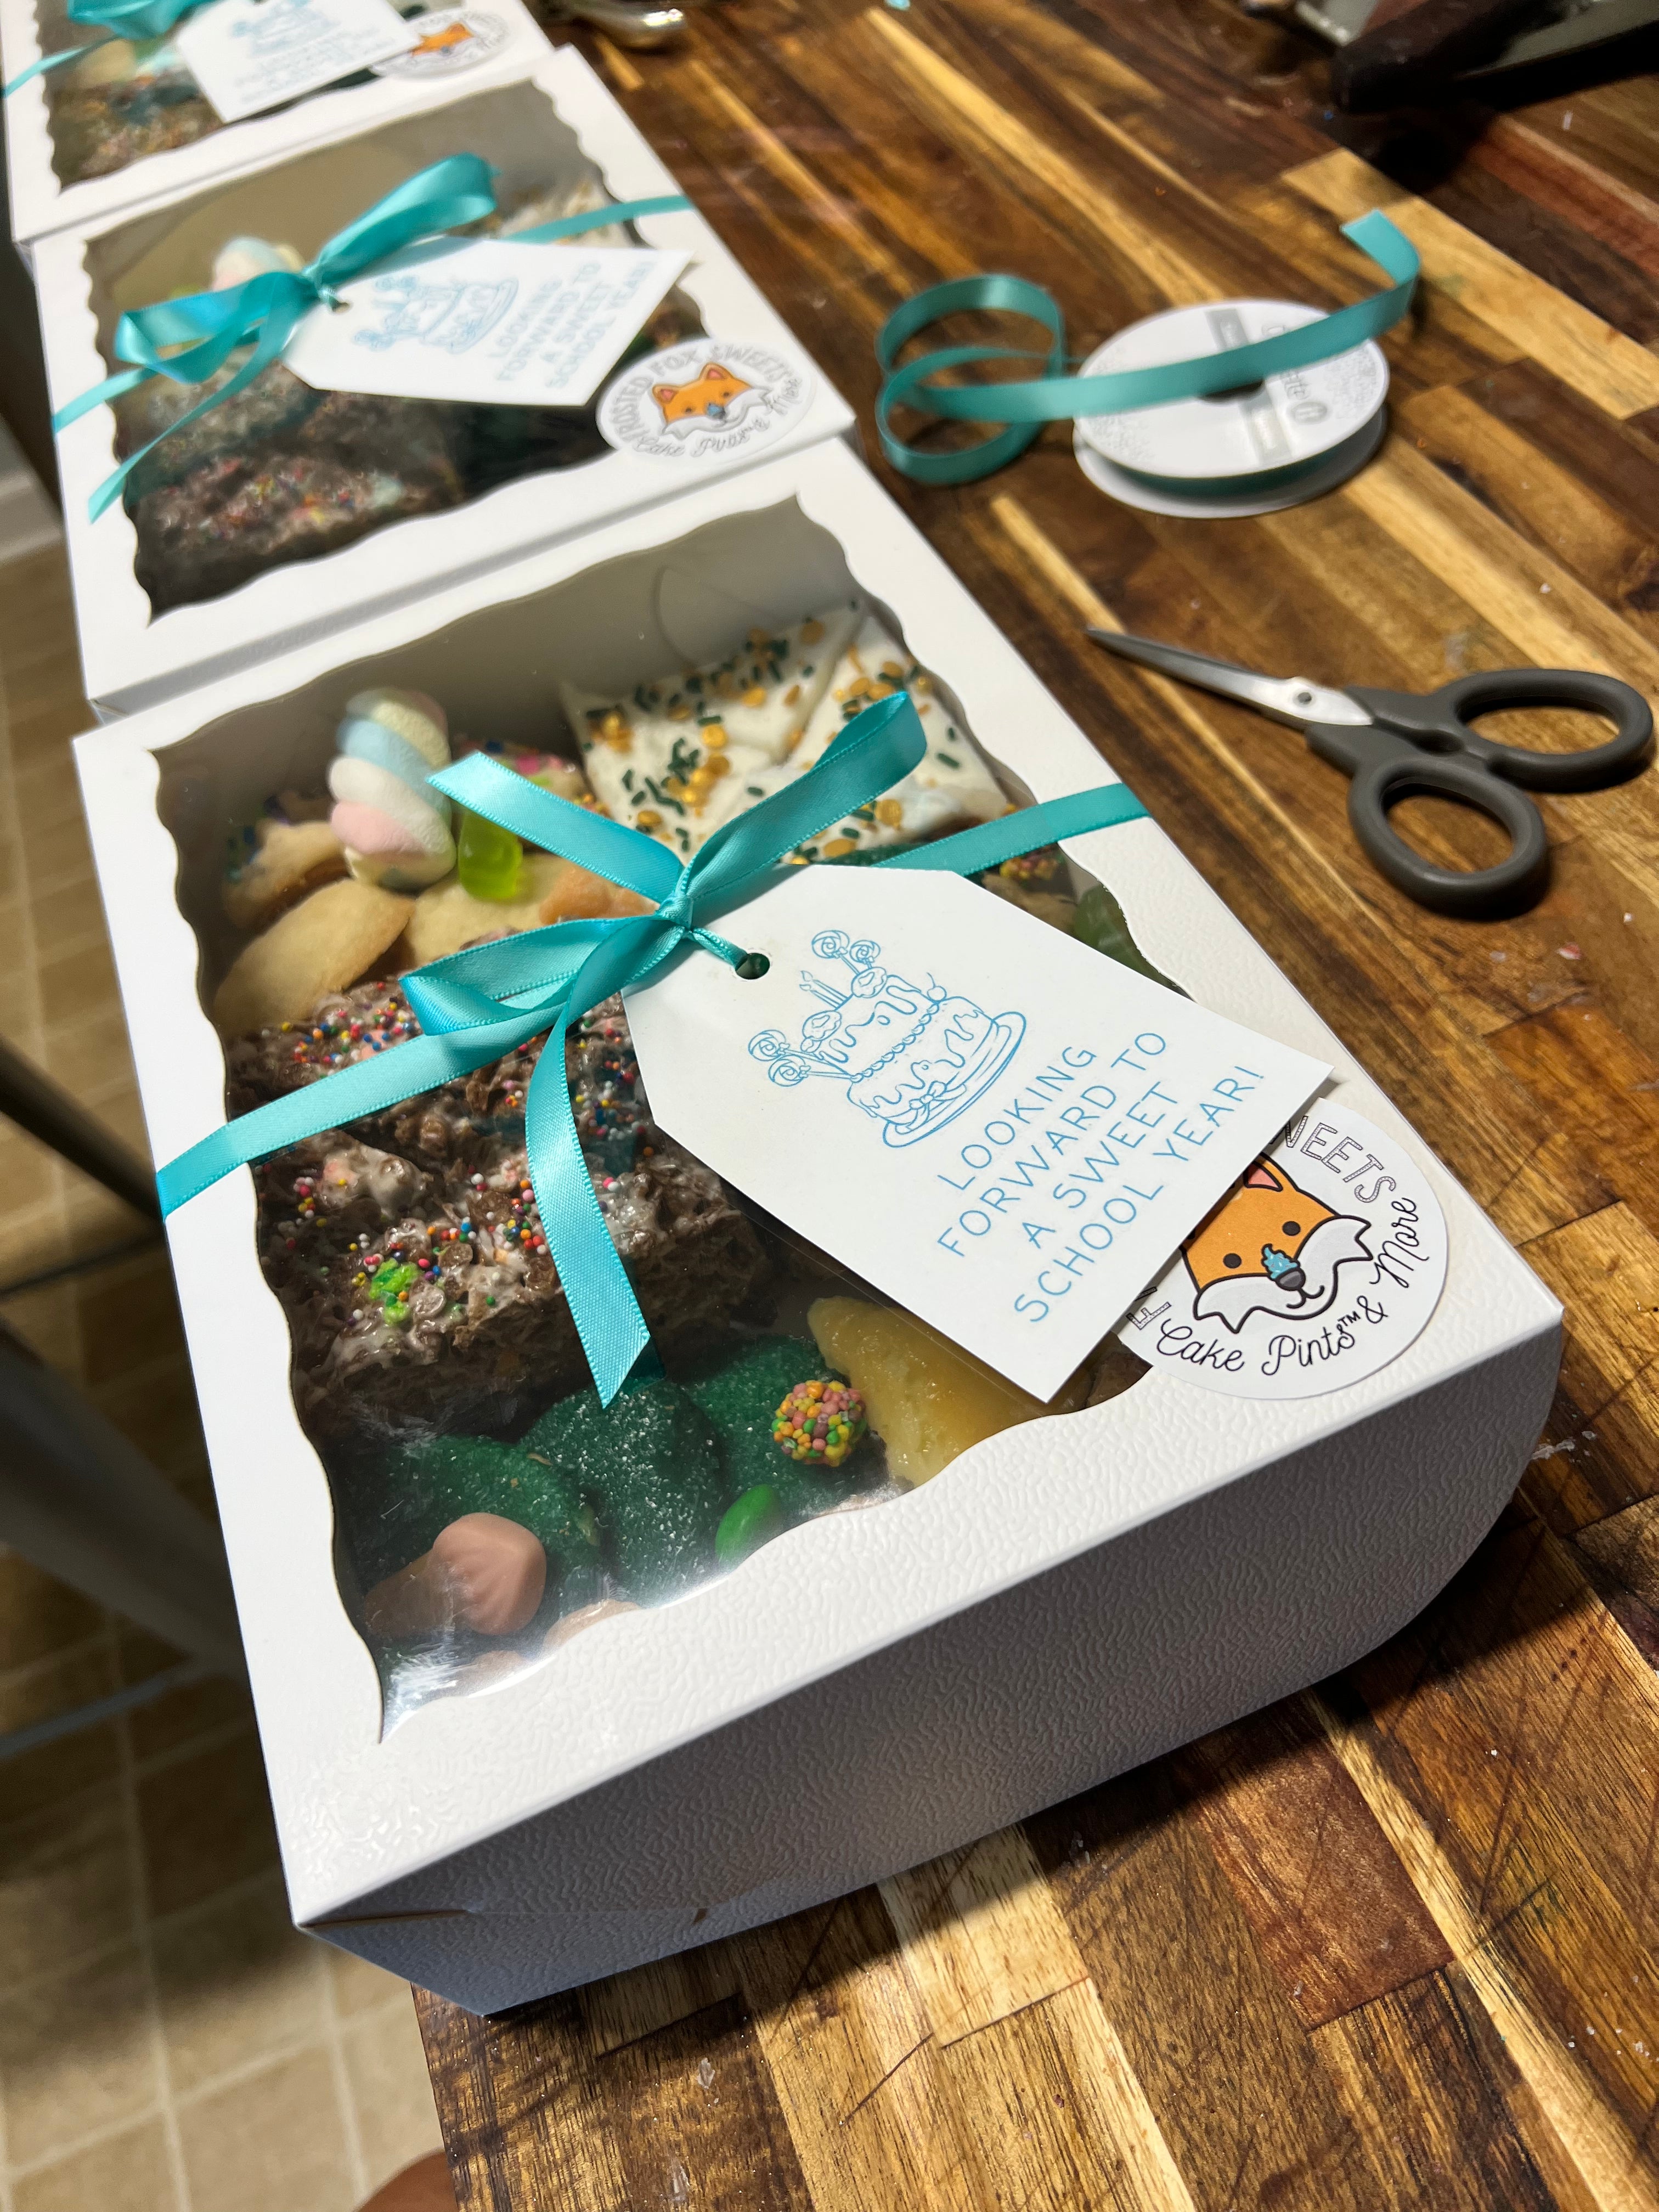 Sampler Boxes - Available in 3 sizes!